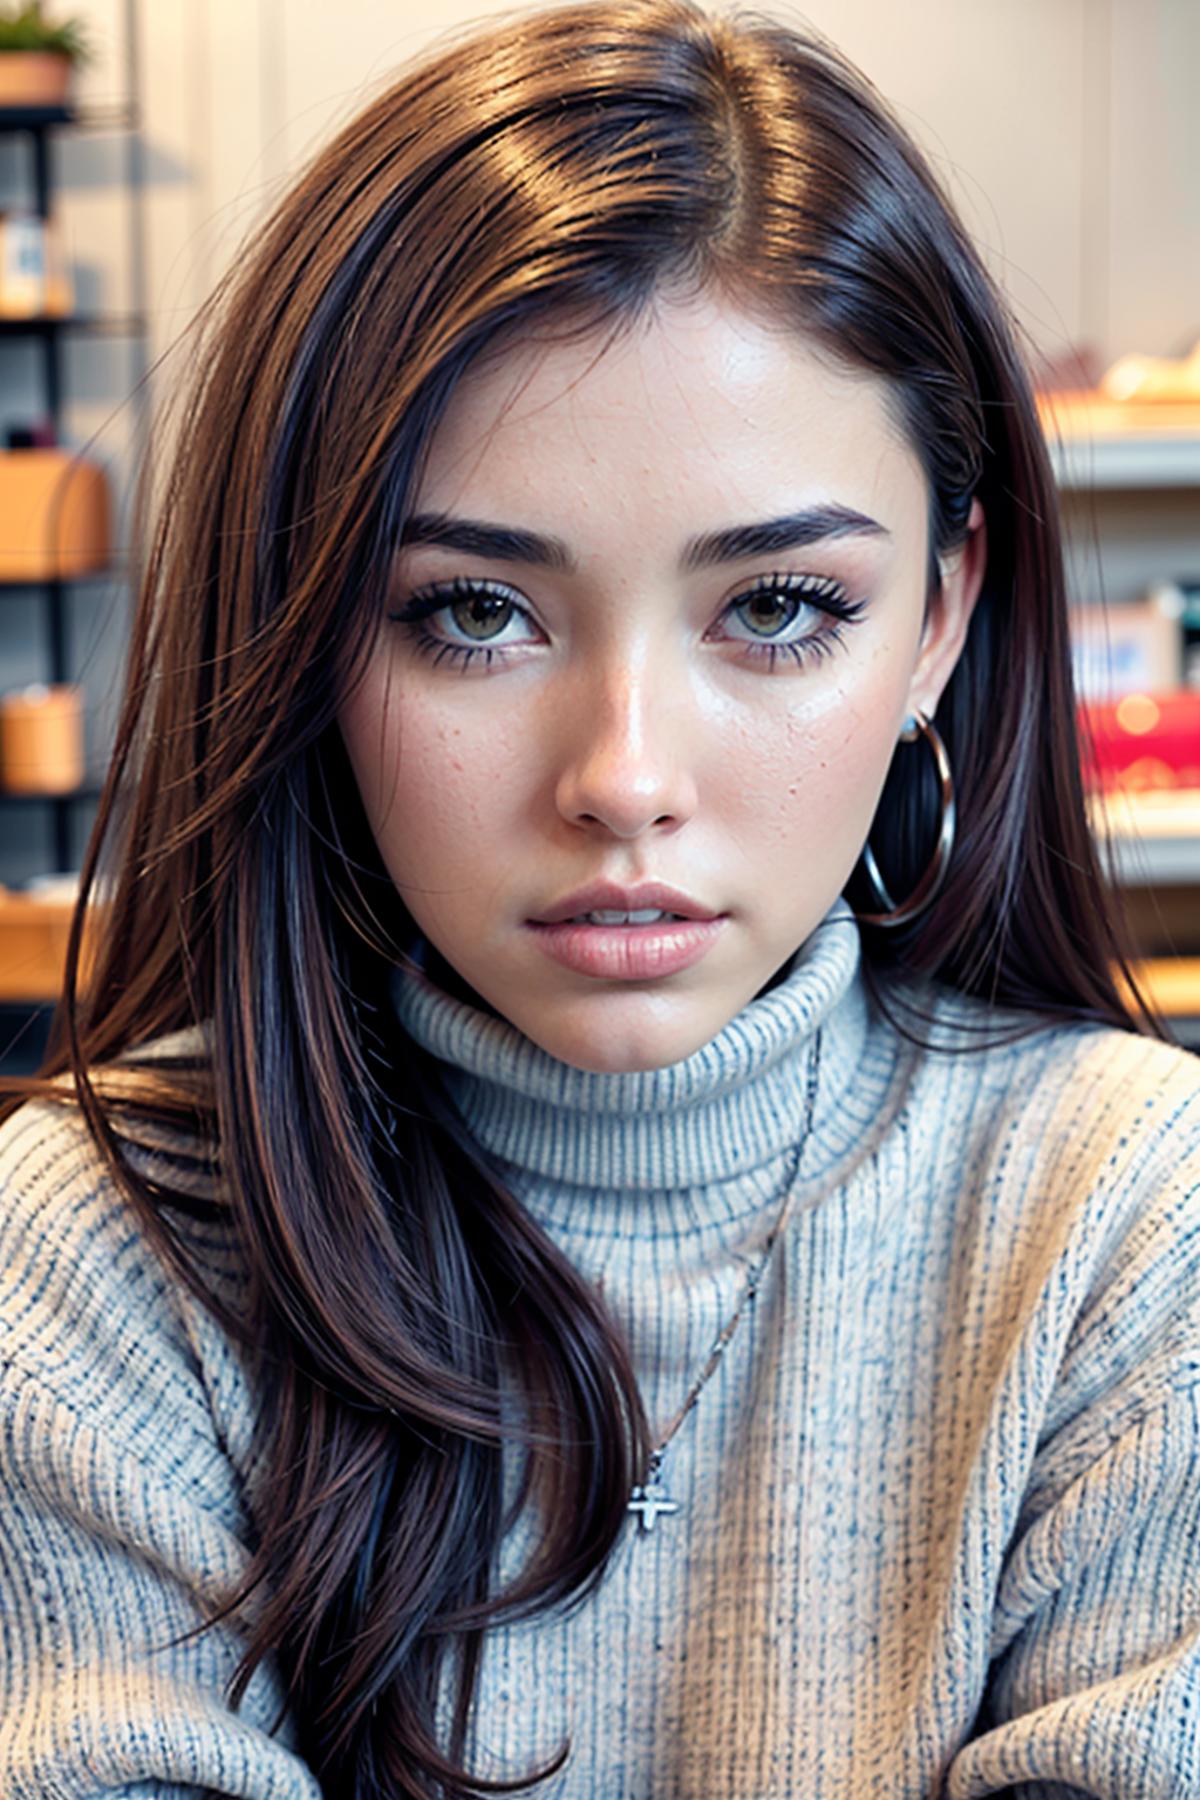 Madison Beer image by ZombieHead